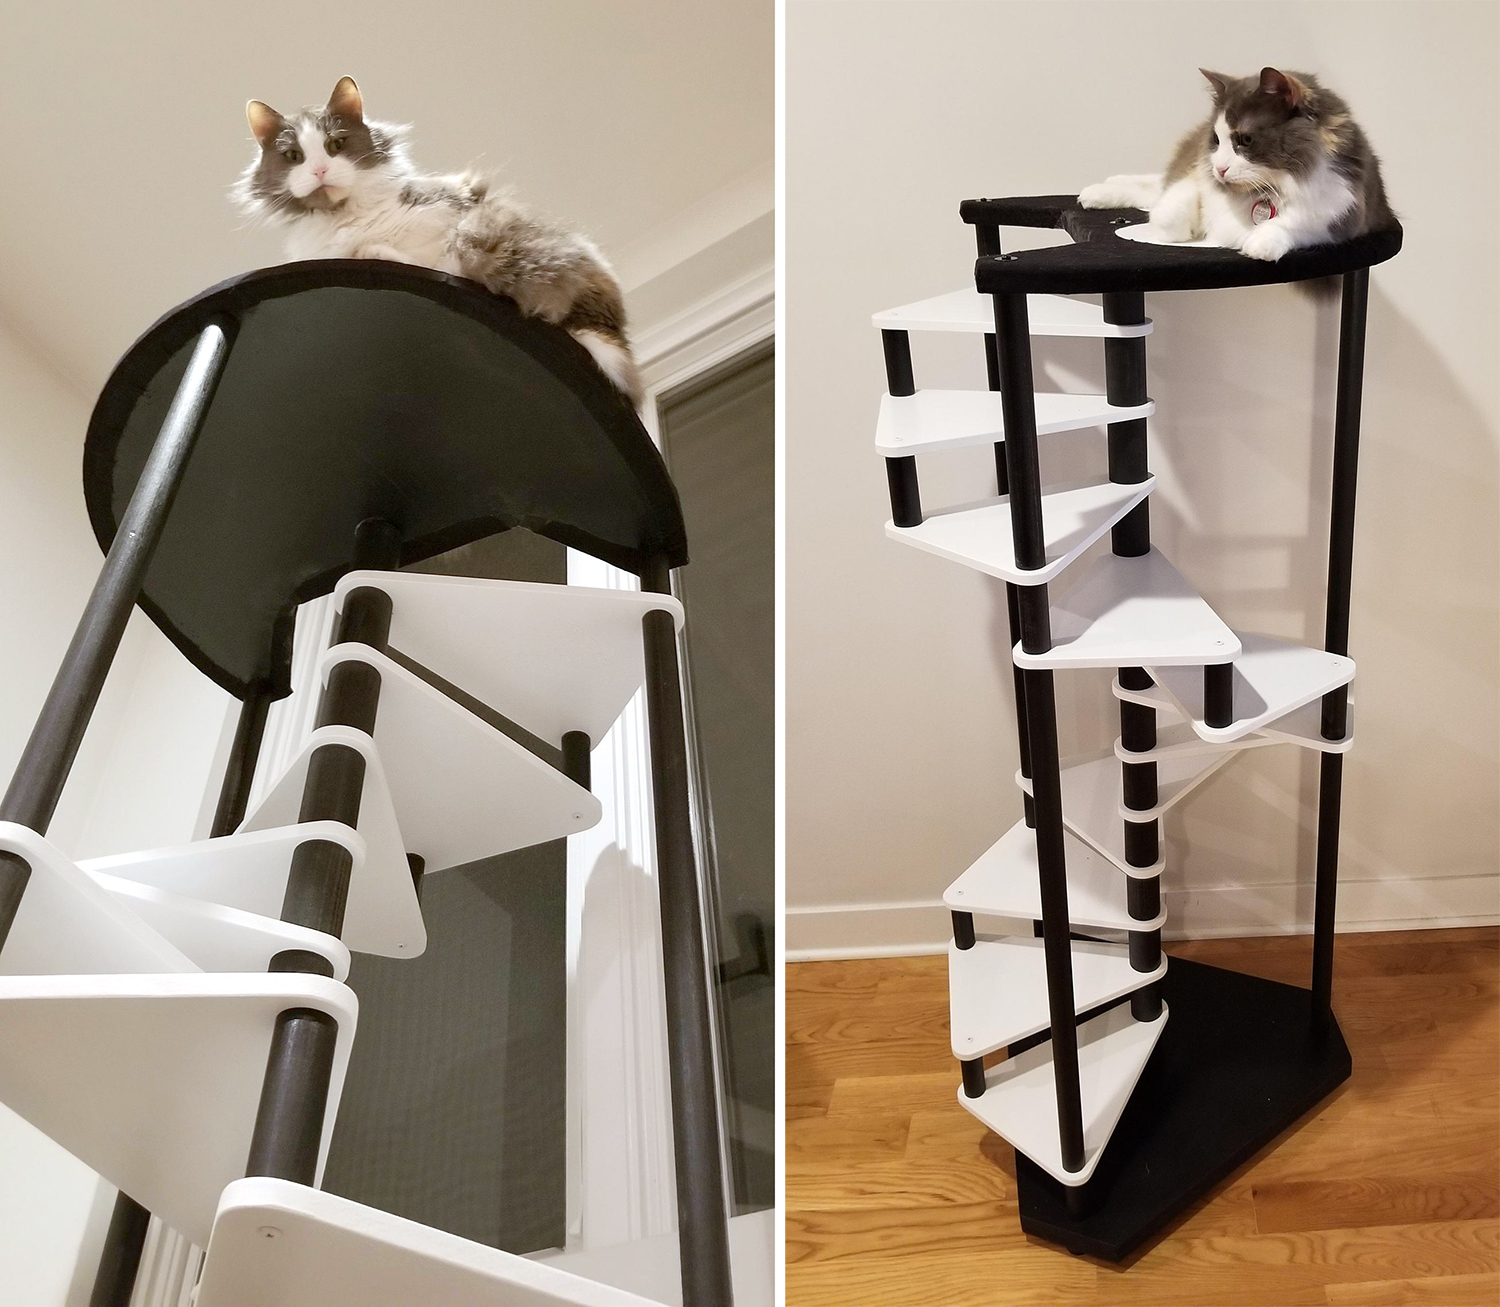 Modern spiral cat tower from Milly Fitcat